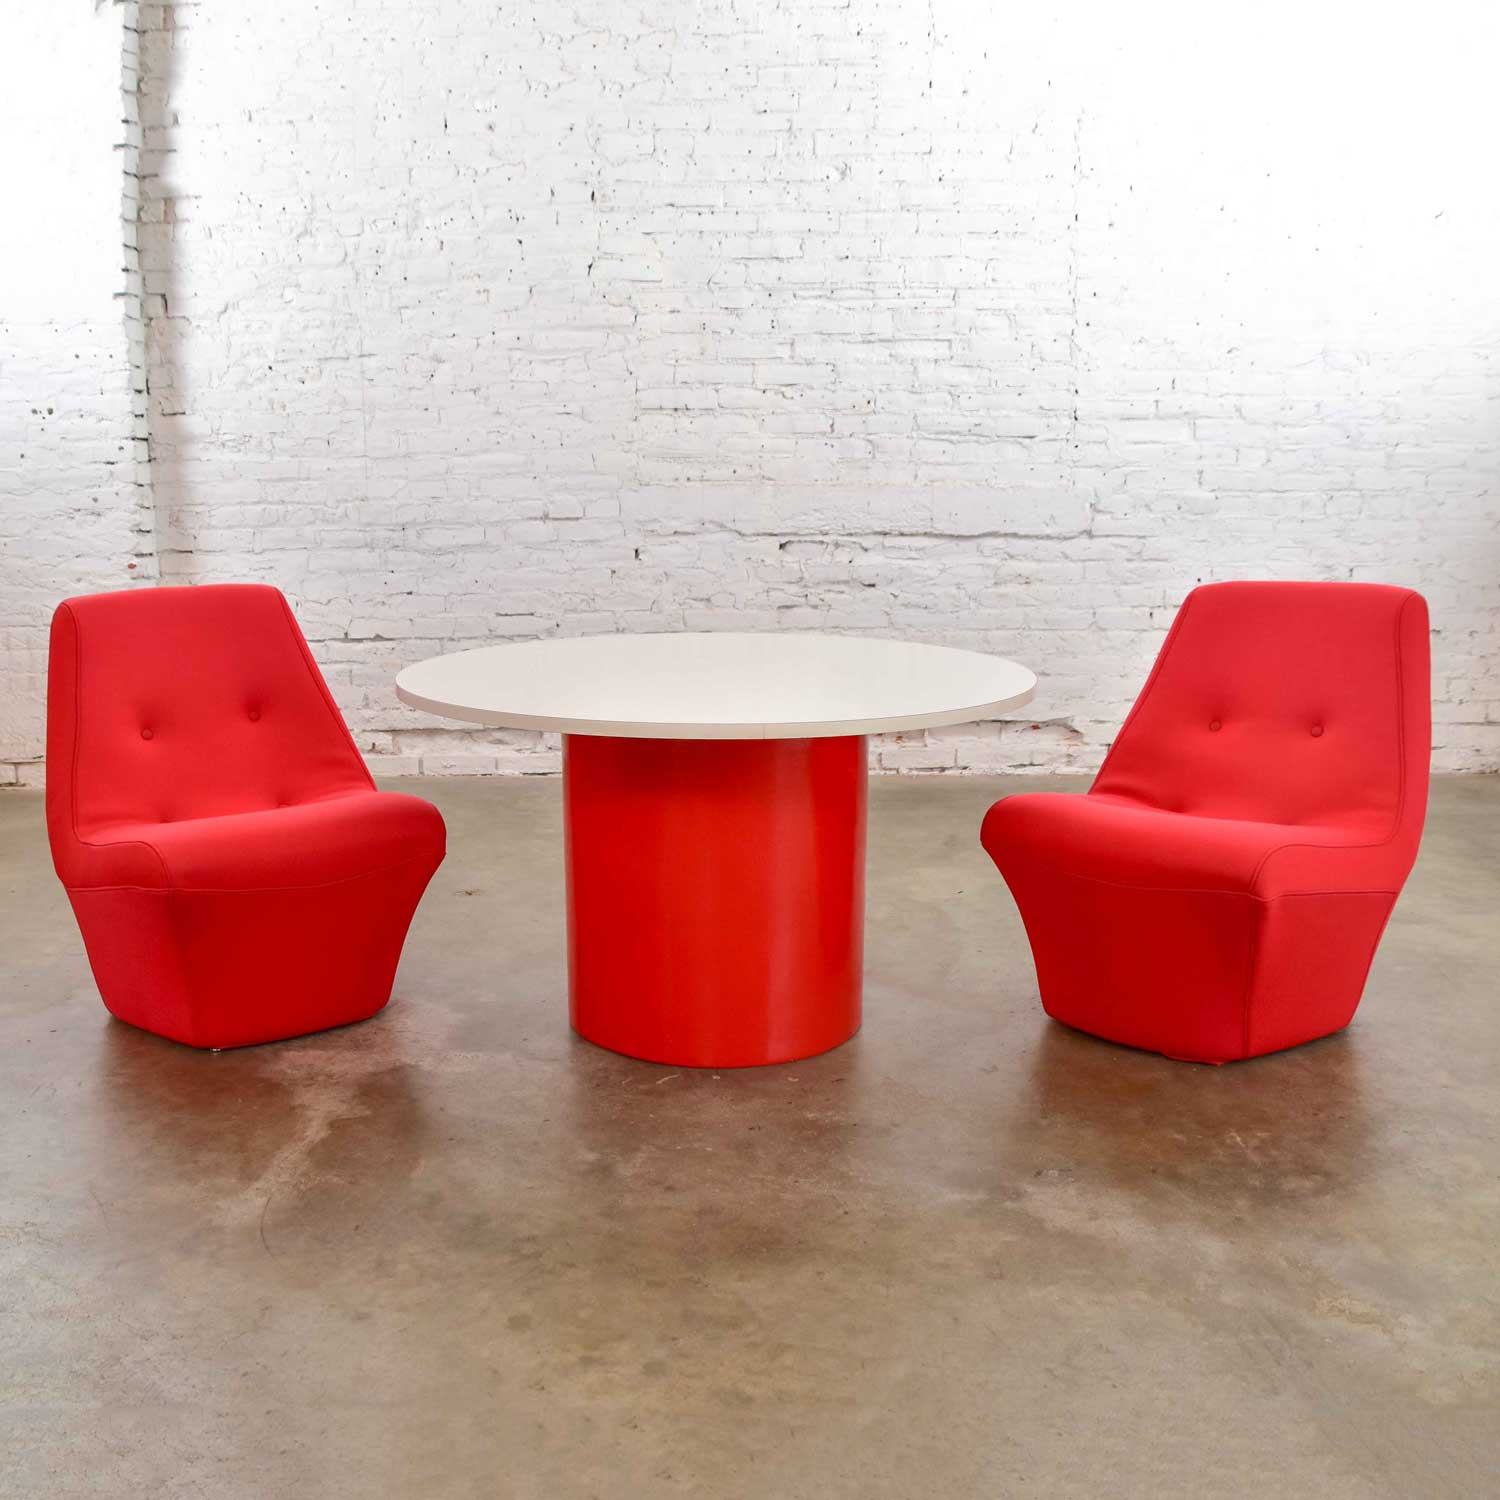 Mod Style Mid-Century Modern Round Table & 2 Chairs by Founders Furniture in Red & White